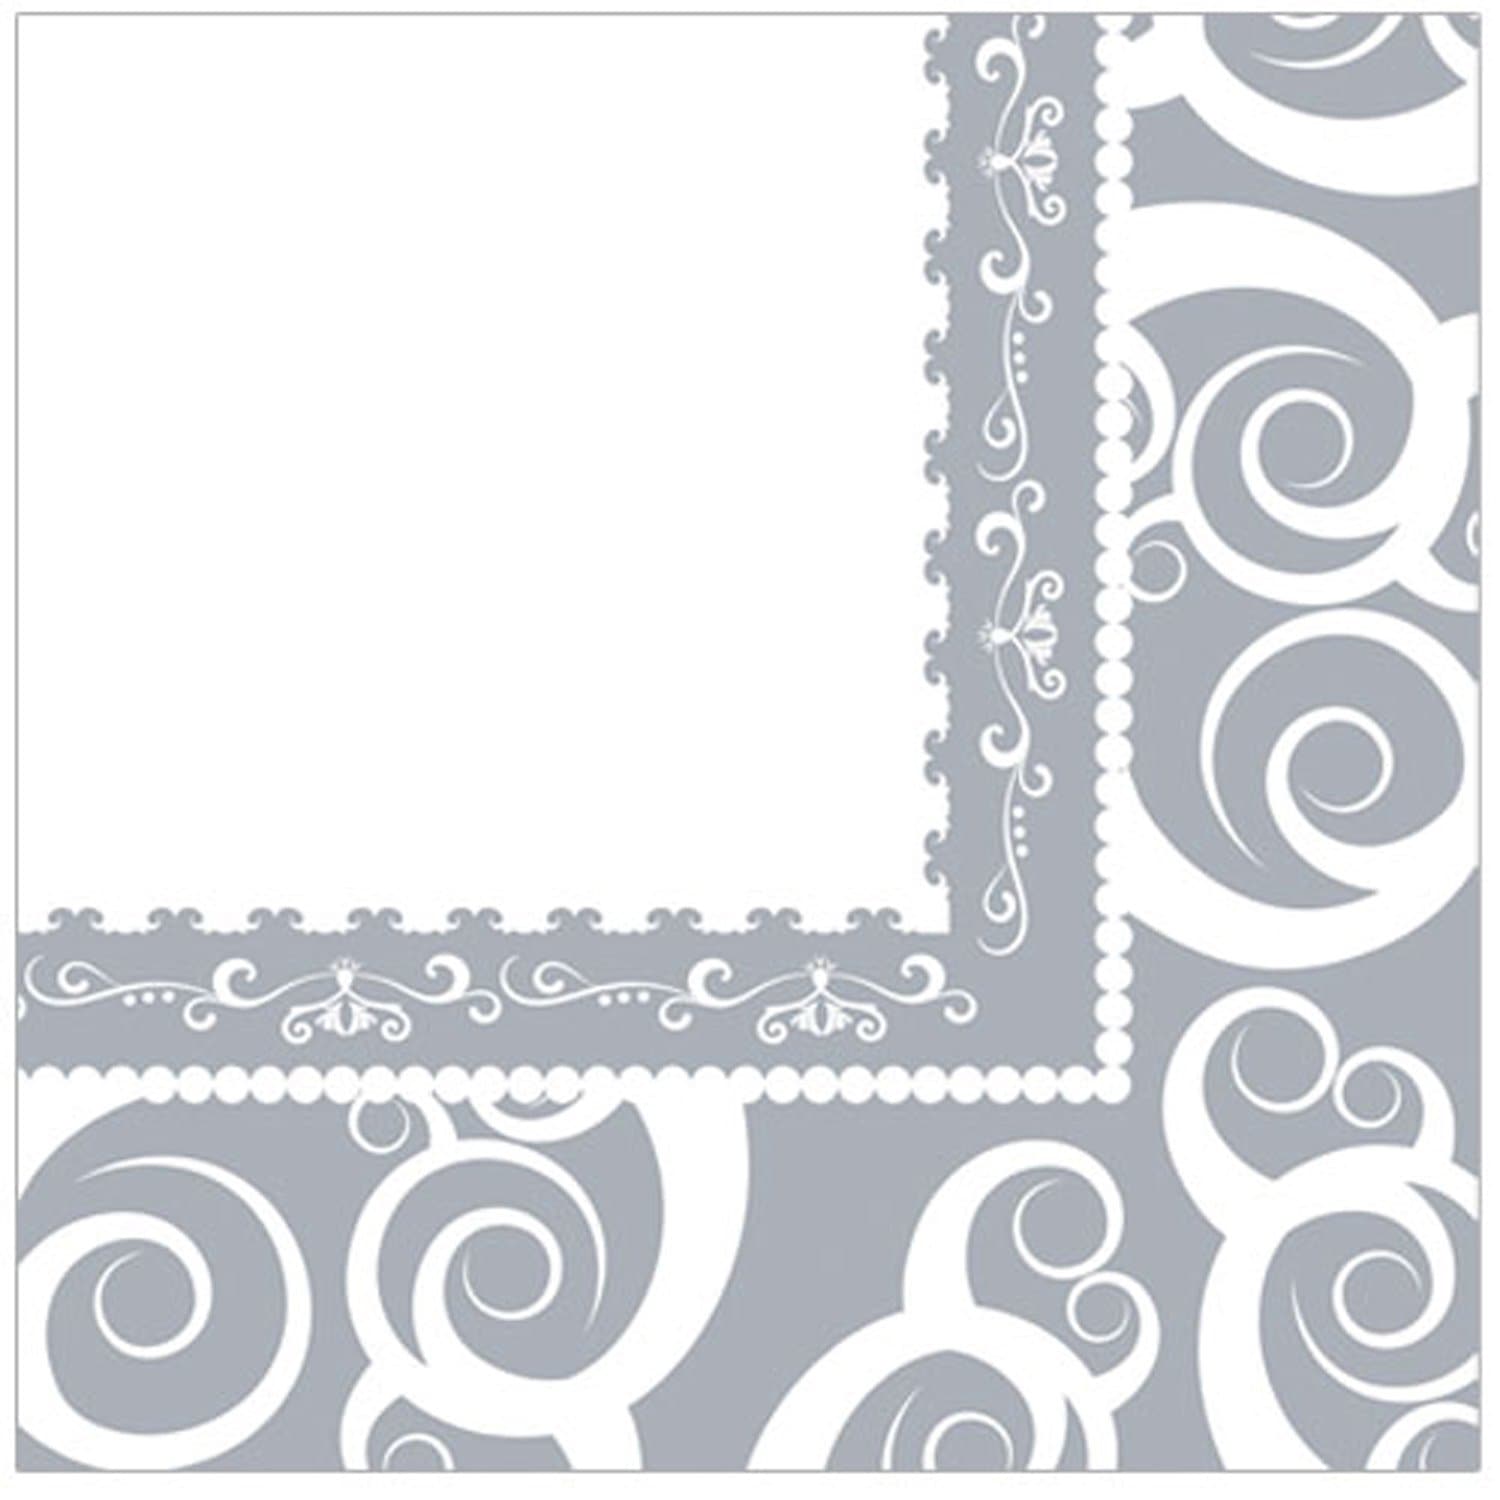 Silver Medley Beverage Napkins 75 count Tablesettings Hanna K Signature   